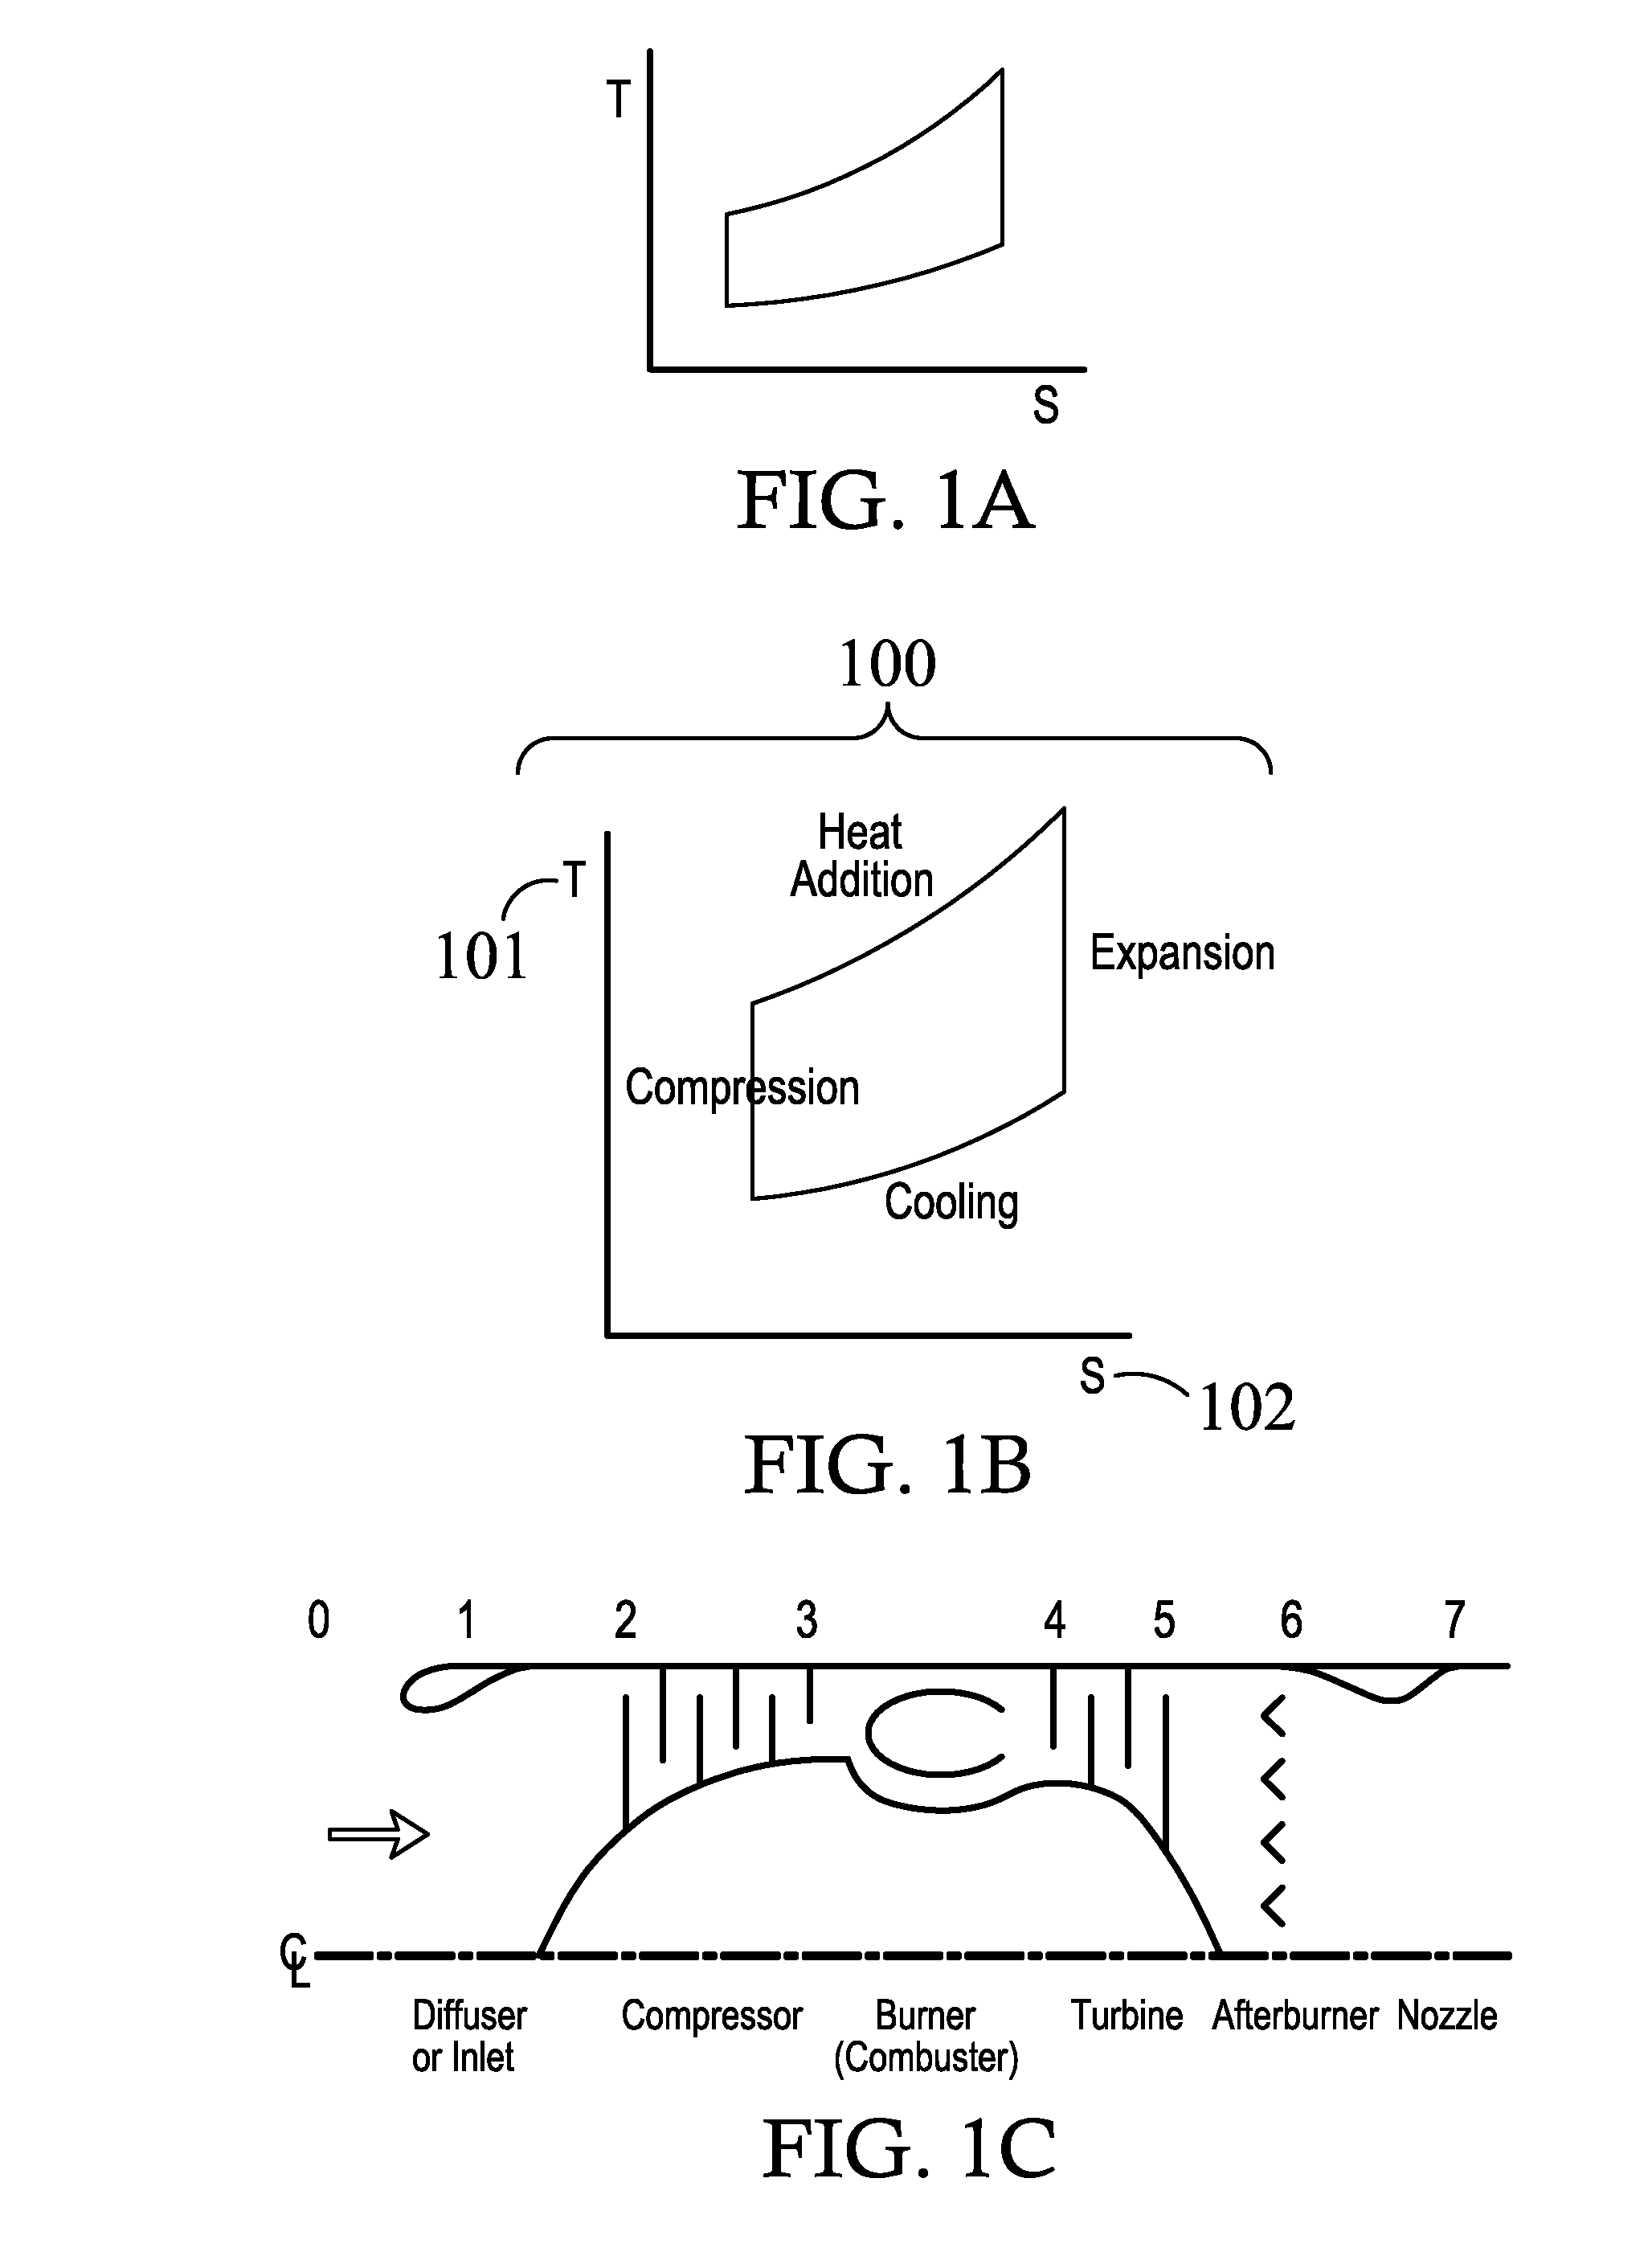 Electric turbine bypass fan and compressor for hybrid propulsion